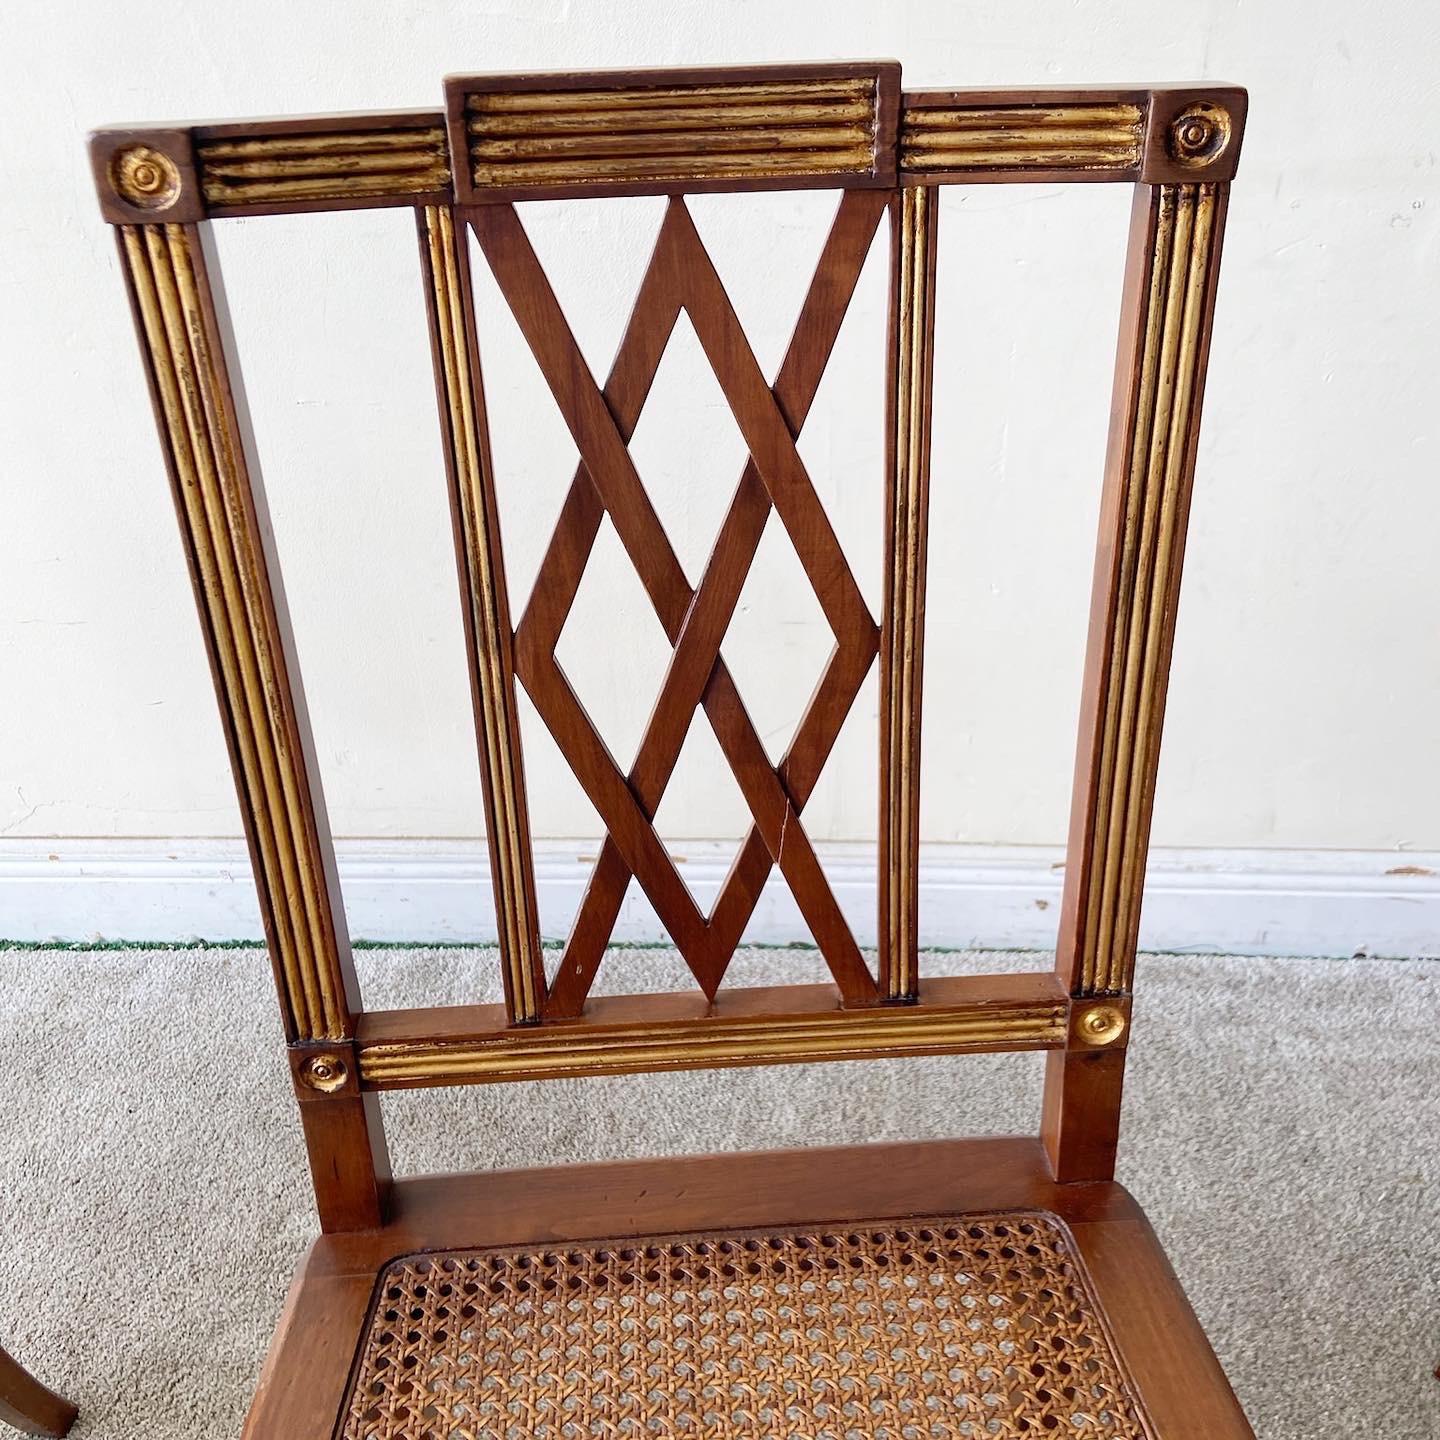 Art Deco Vintage Cane and Wood Dining Chairs for Bloomingdale’s, 8 Chairs